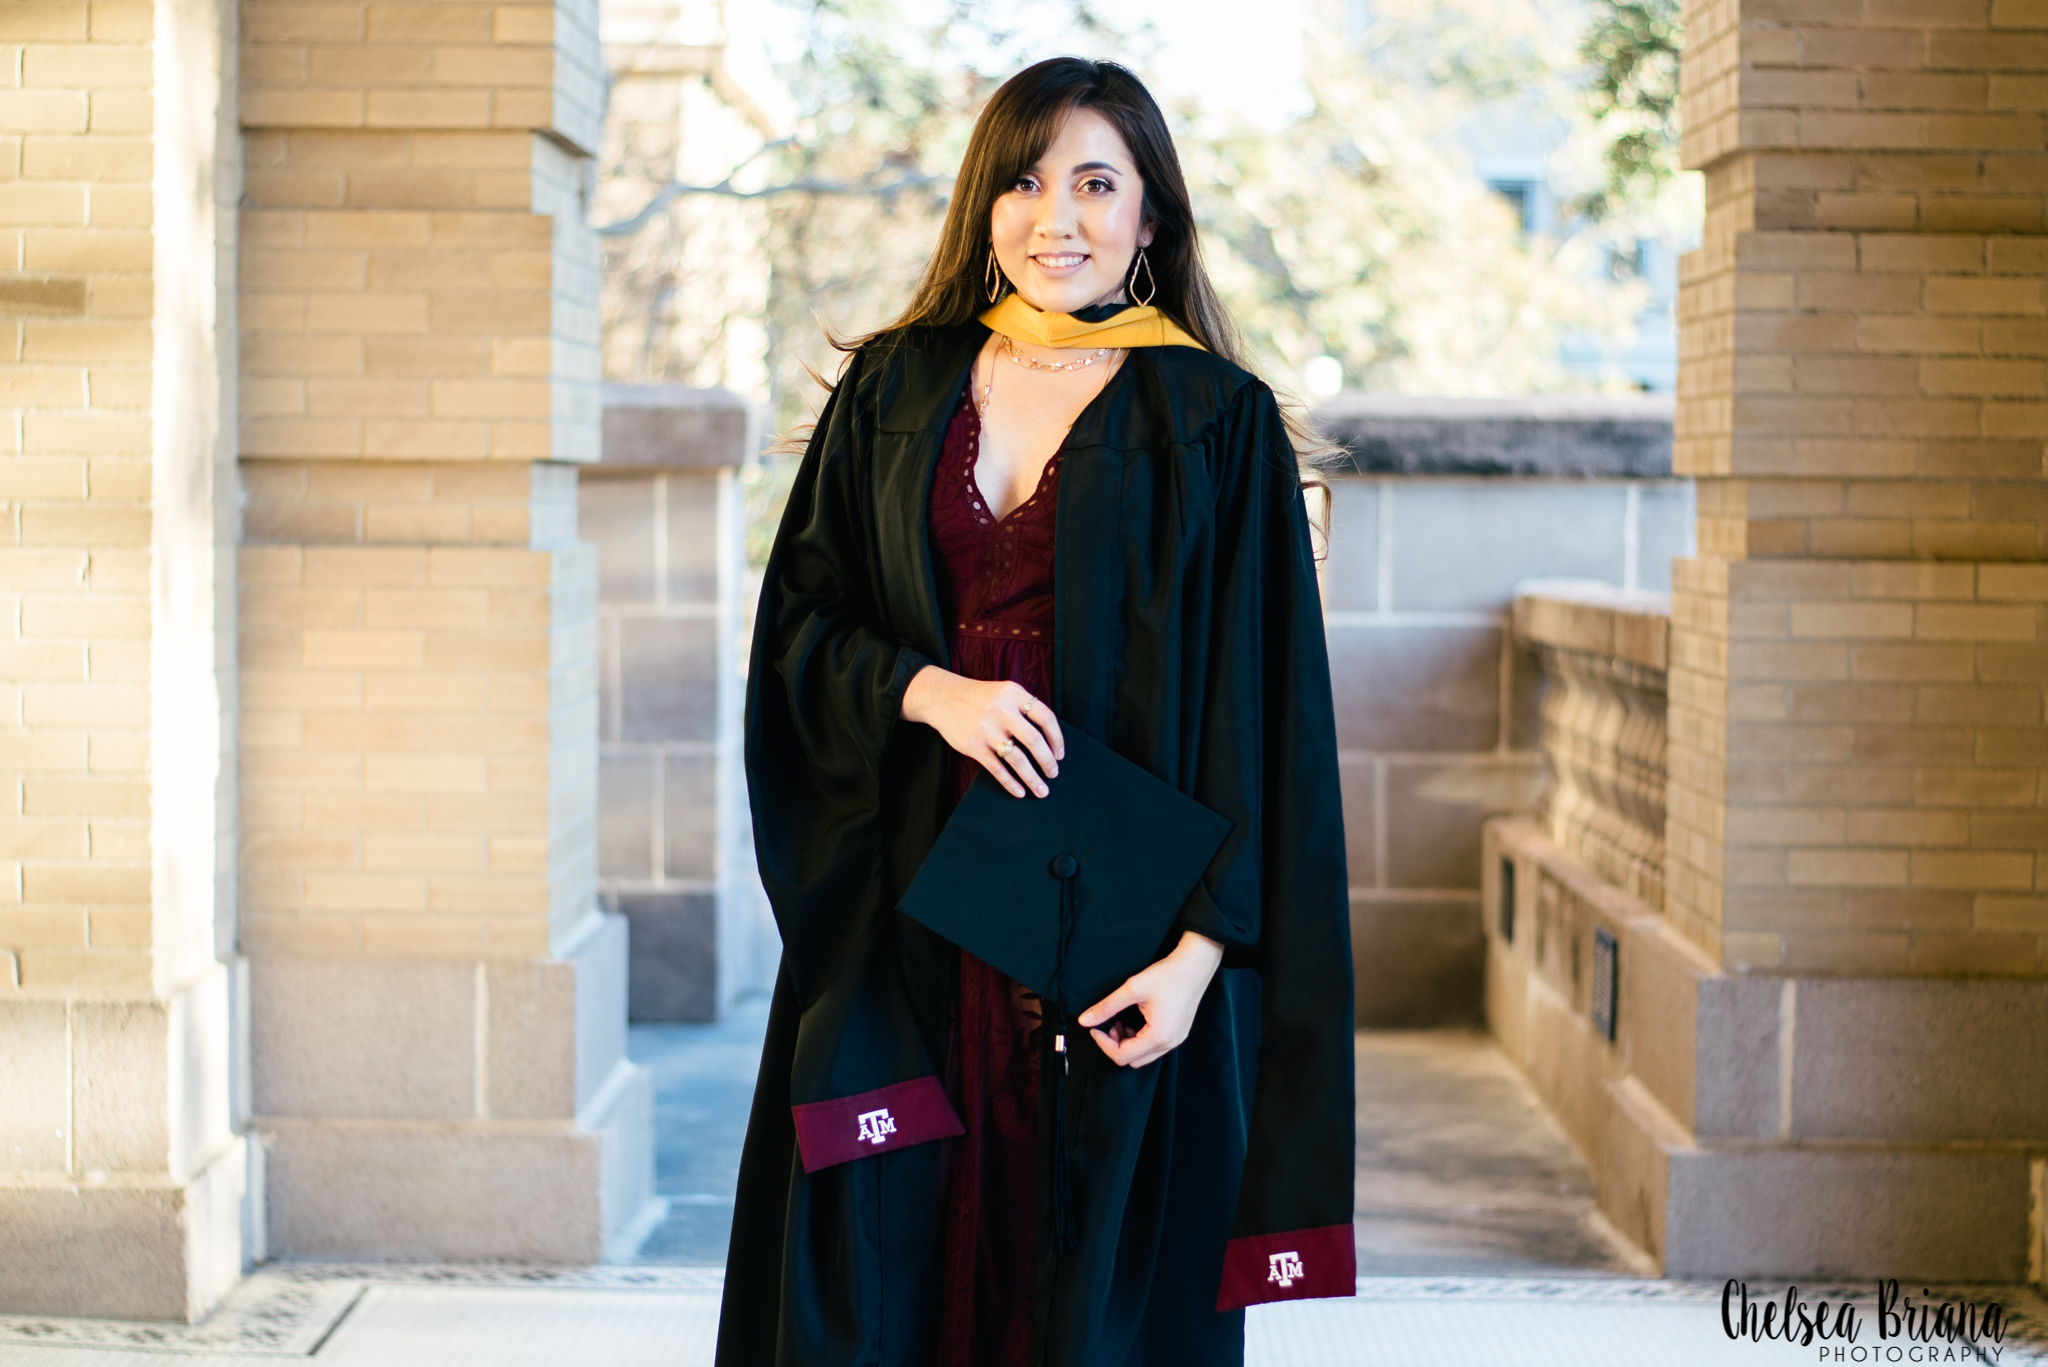 Texas A&M cap and gown